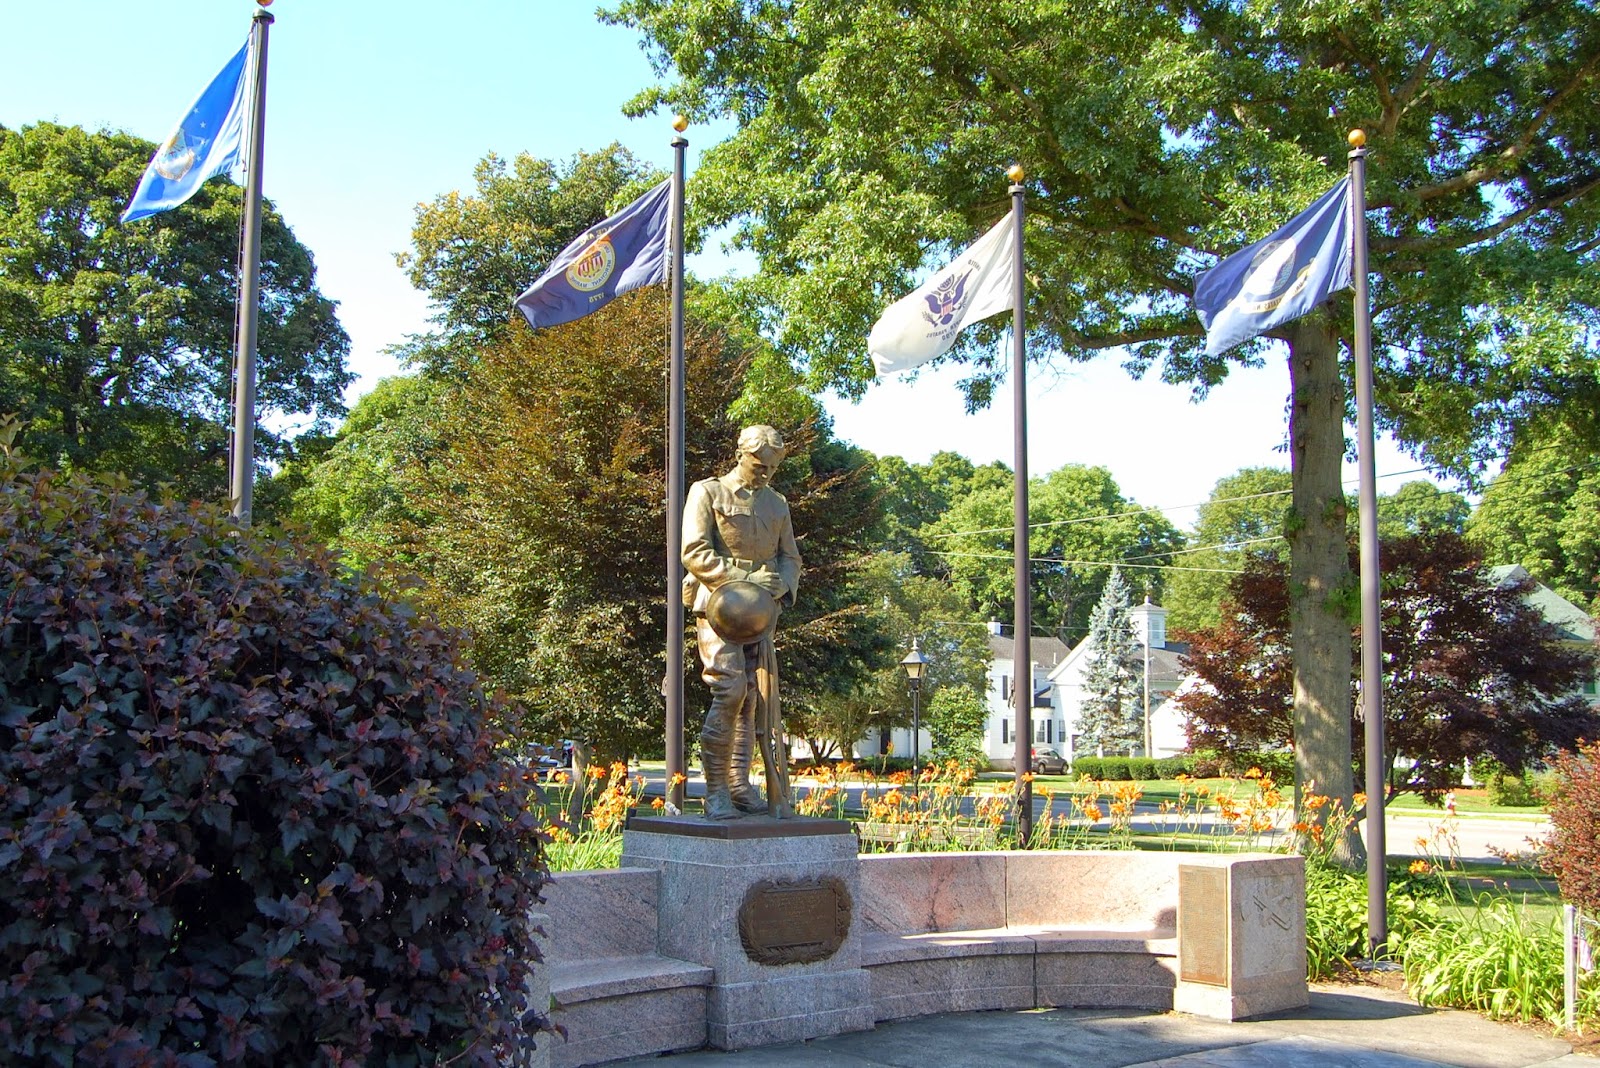 flags flying in the breeze over the World War I memorial